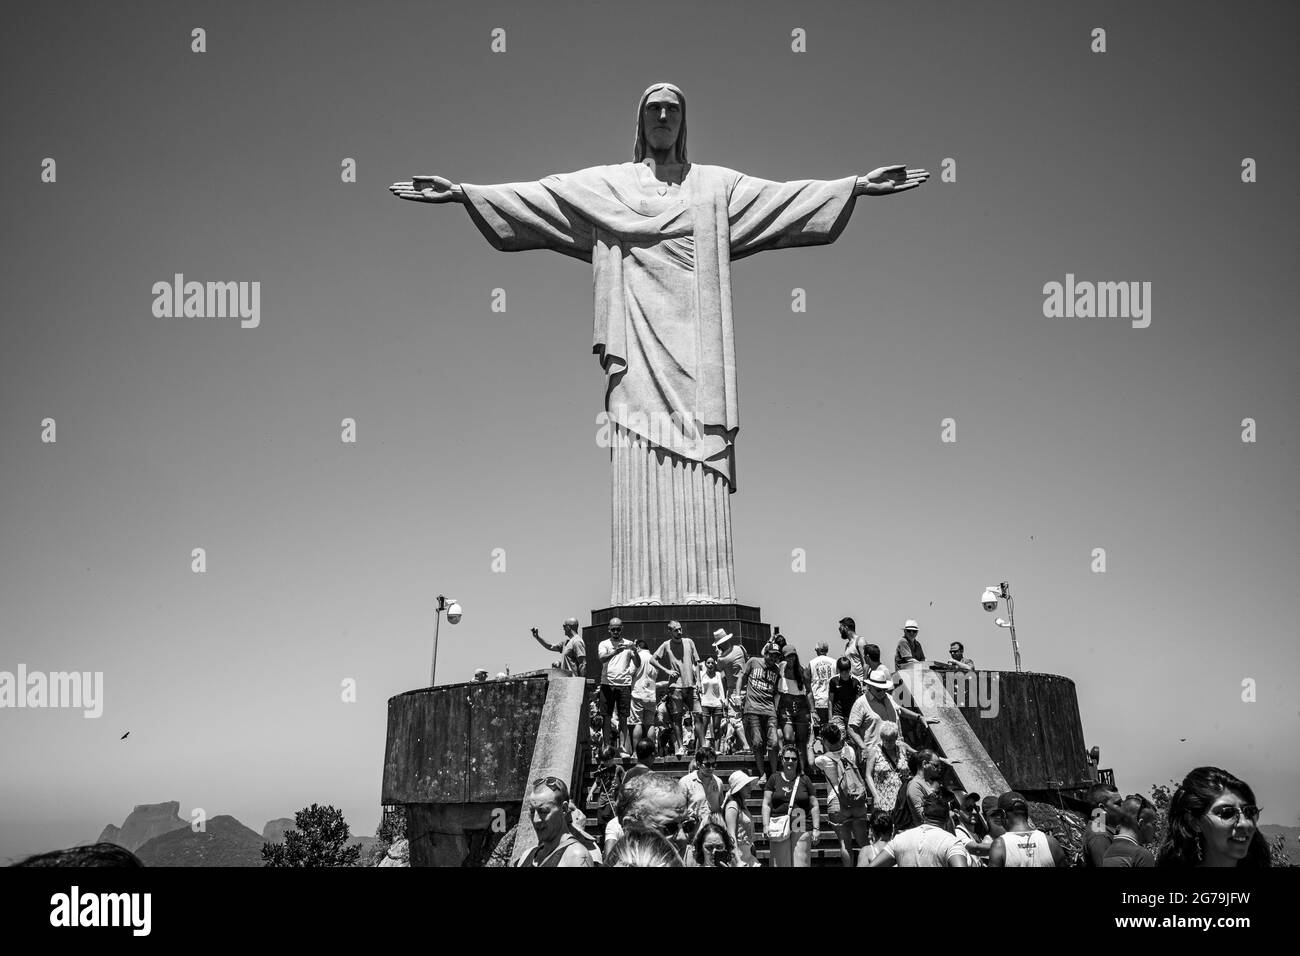 Lots of Tourists at the Christ the Redeemer (Cristo Redentor) statue atop the Corcovado Mountain in Rio de Janeiro, Brazil. Stock Photo